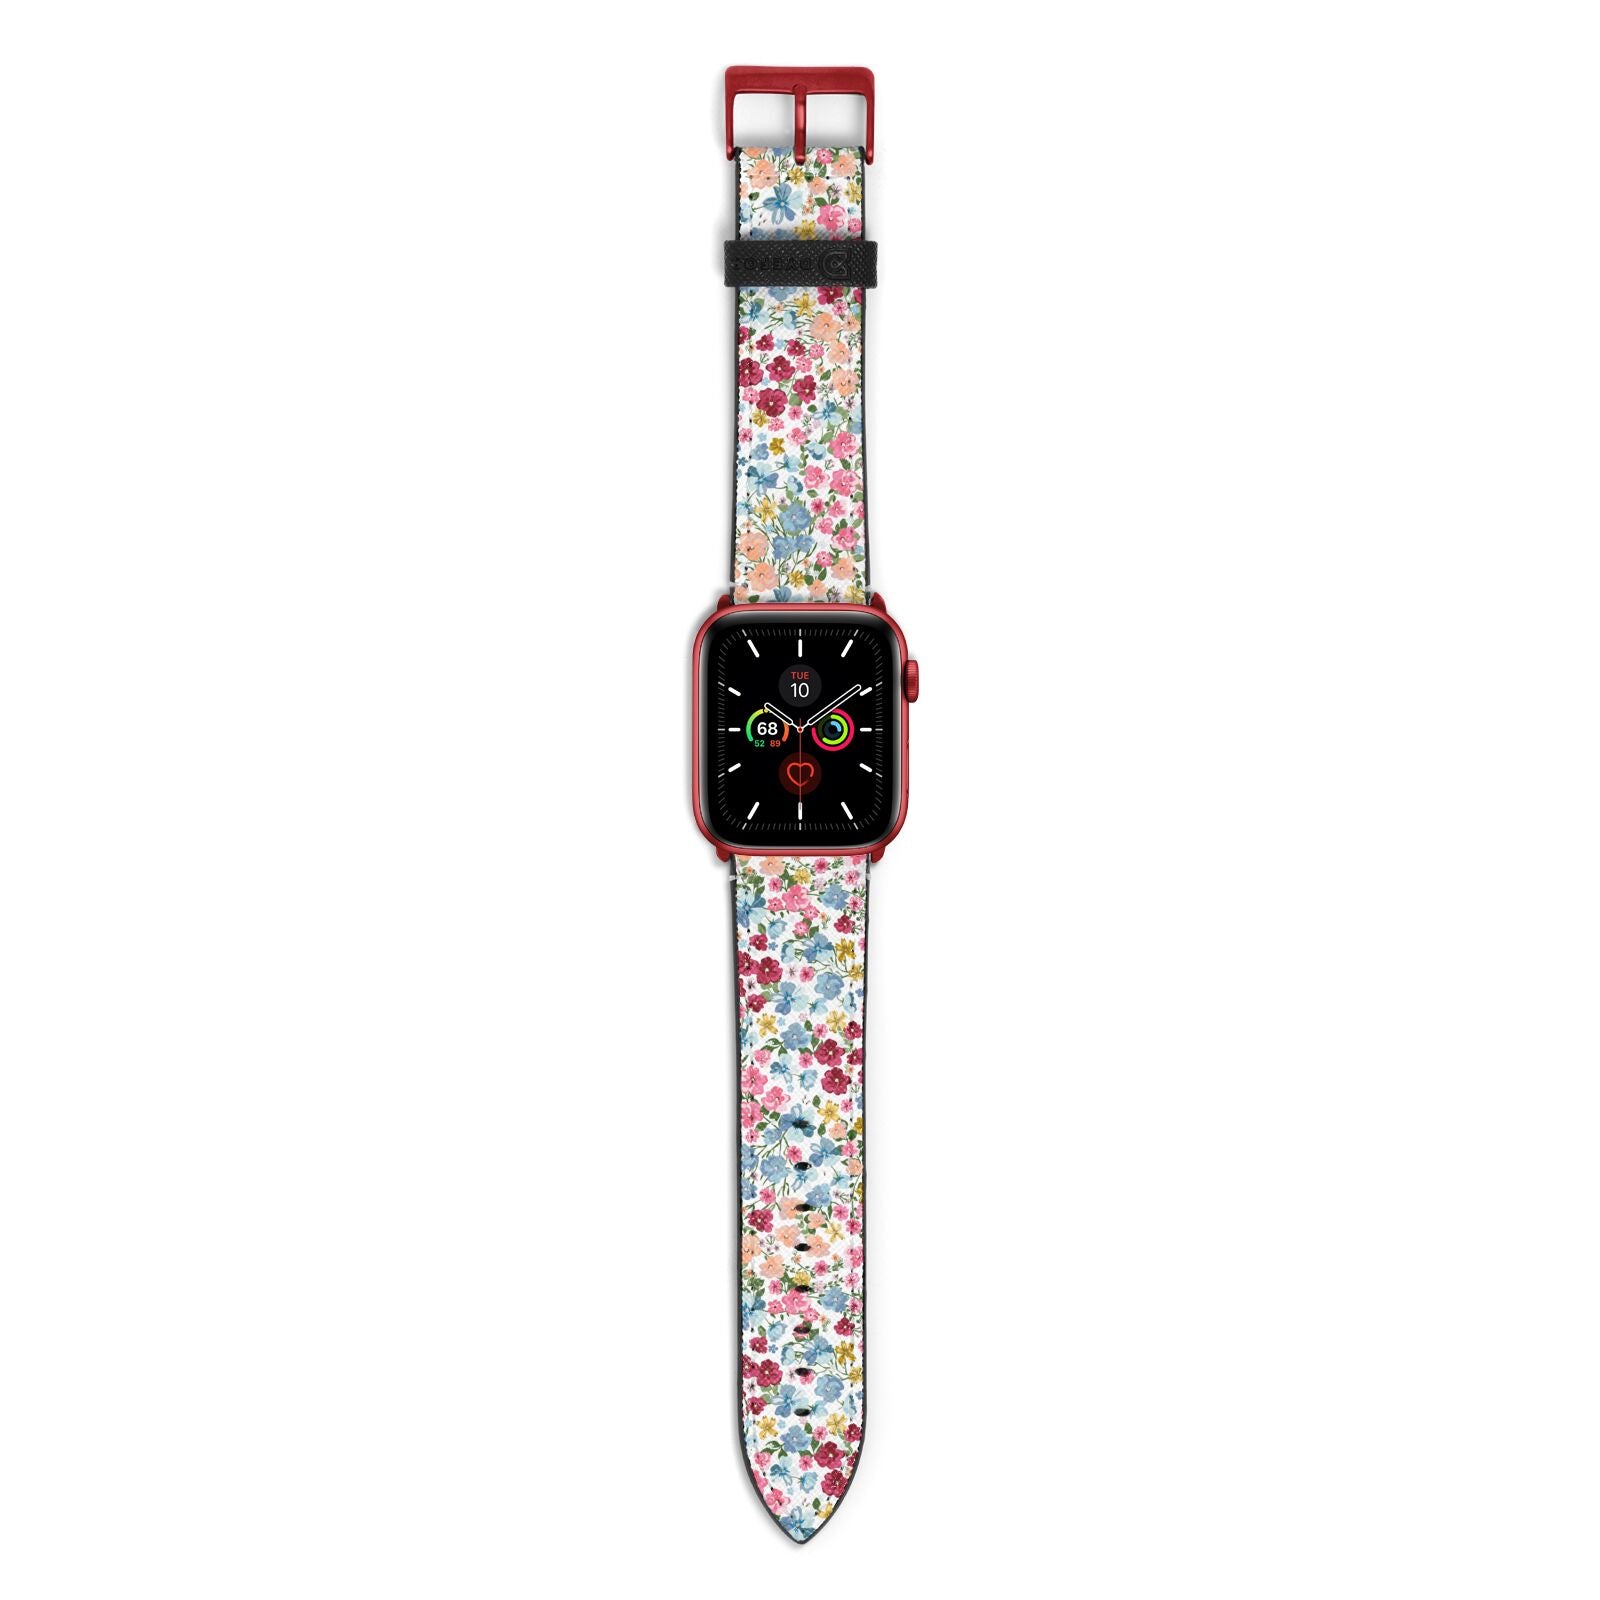 Floral Meadow Apple Watch Strap with Red Hardware